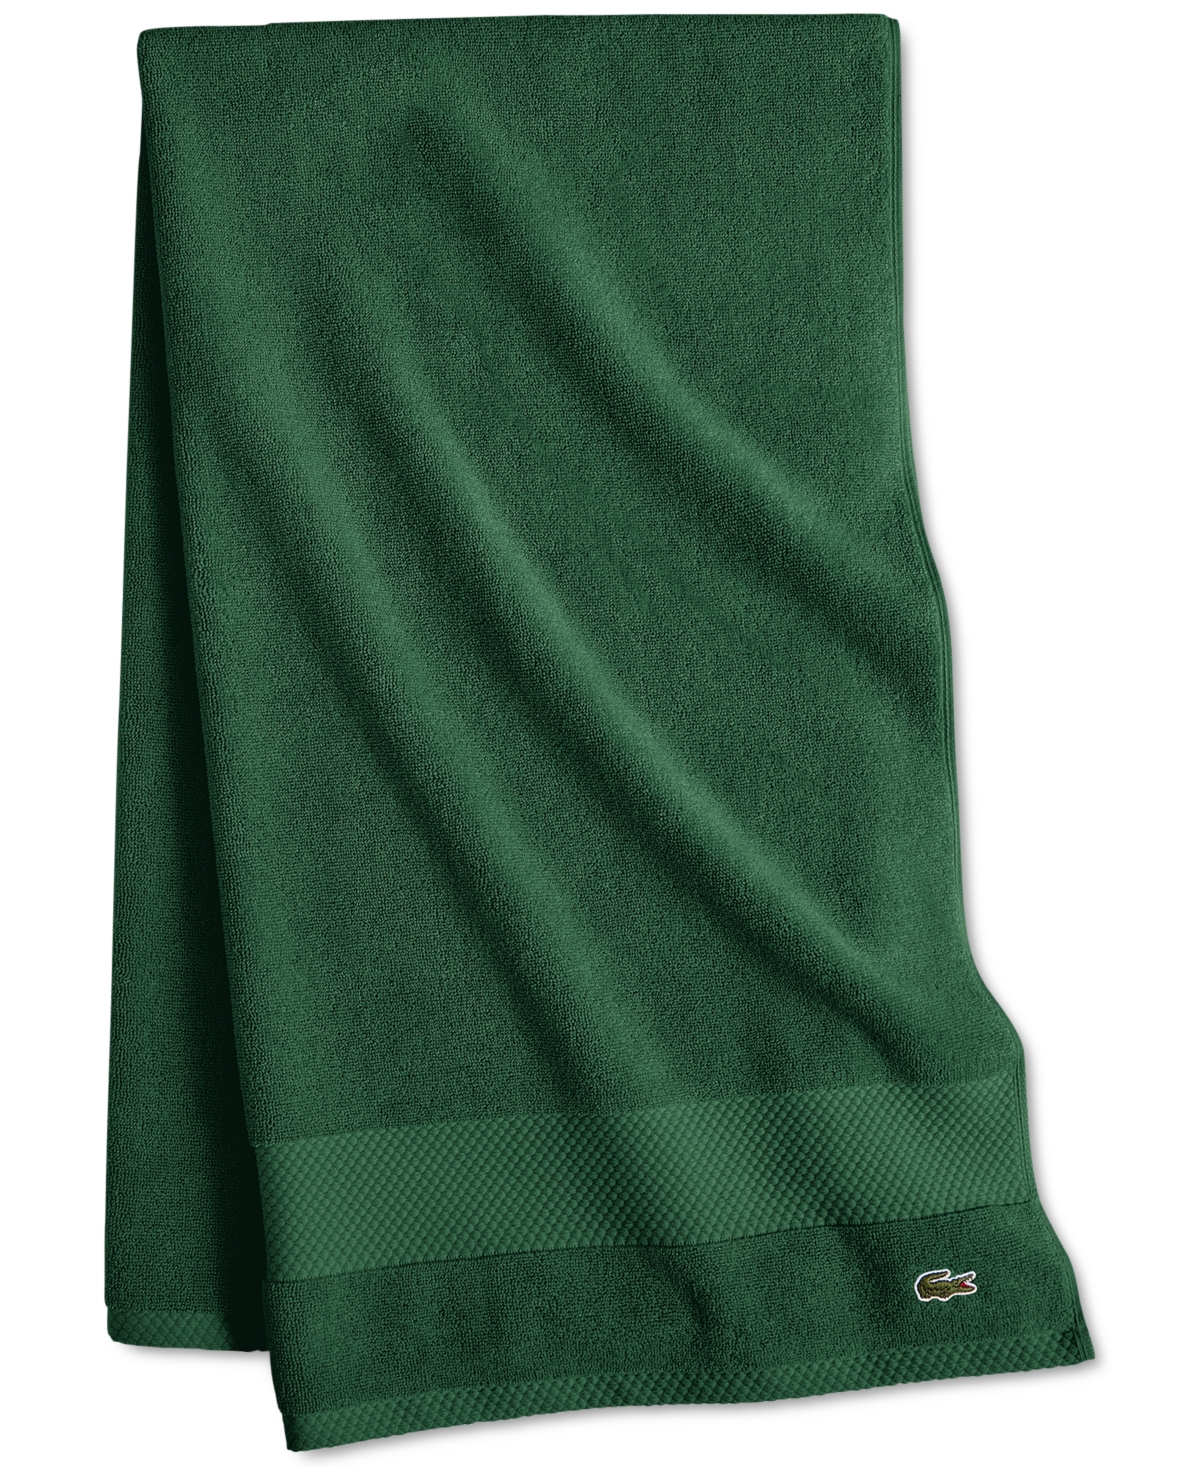 Lacoste Home Heritage Anti-microbial Supima Cotton Bath Towel, 30" X 54" In Croc Green